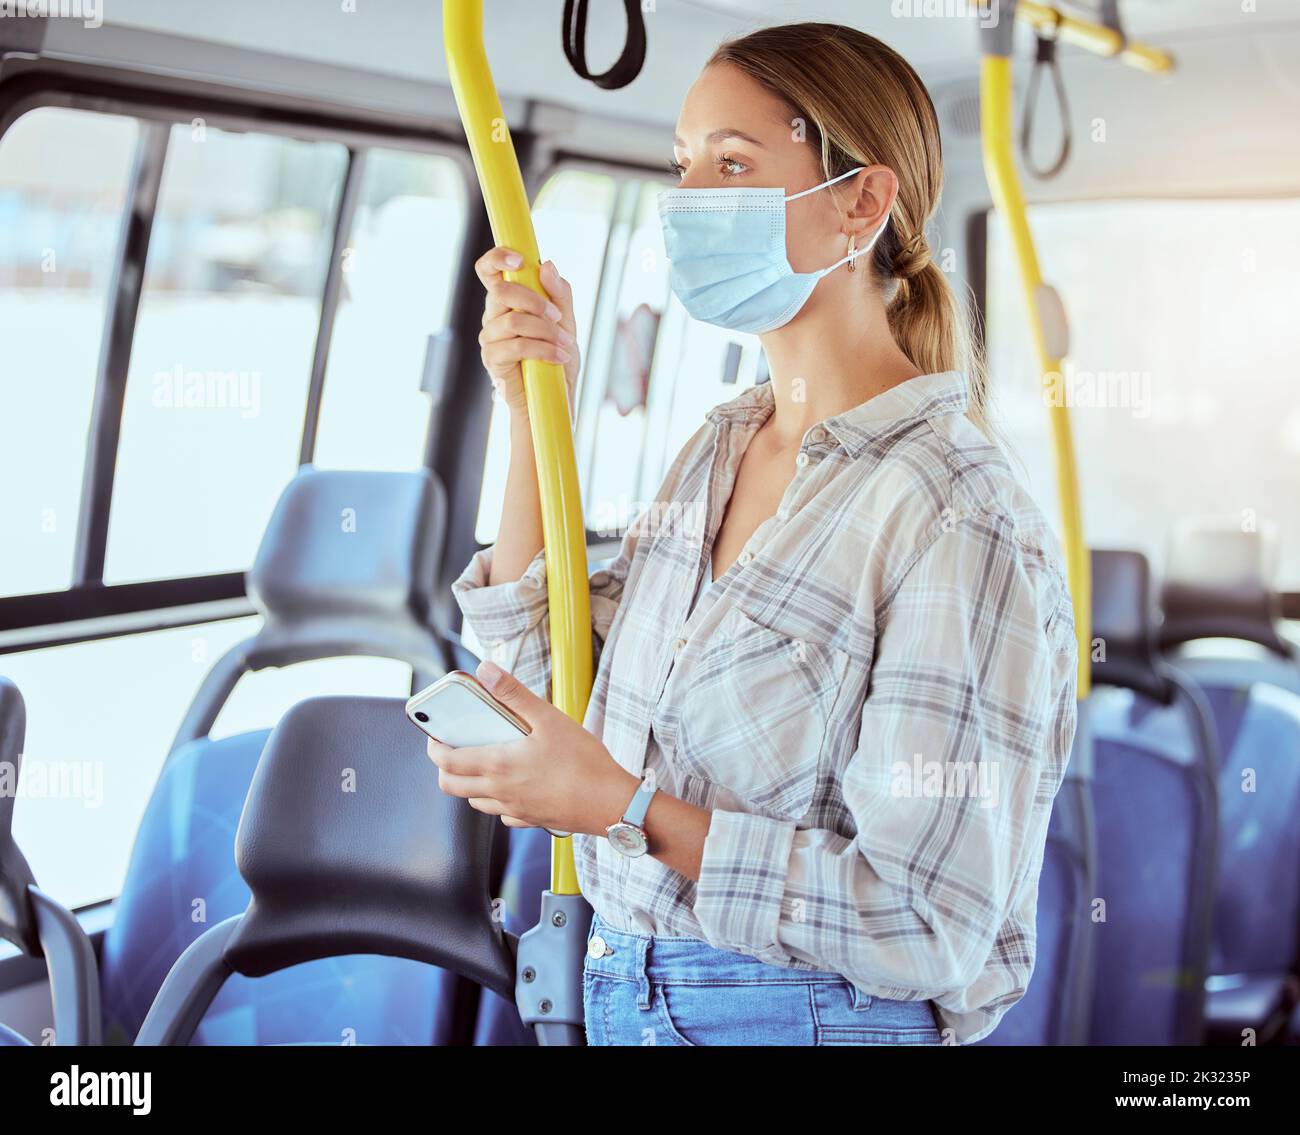 Covid, face mask and public transport with woman in a bus or train on commute into city or work during coronavirus pandemic. Travel, precaution and Stock Photo